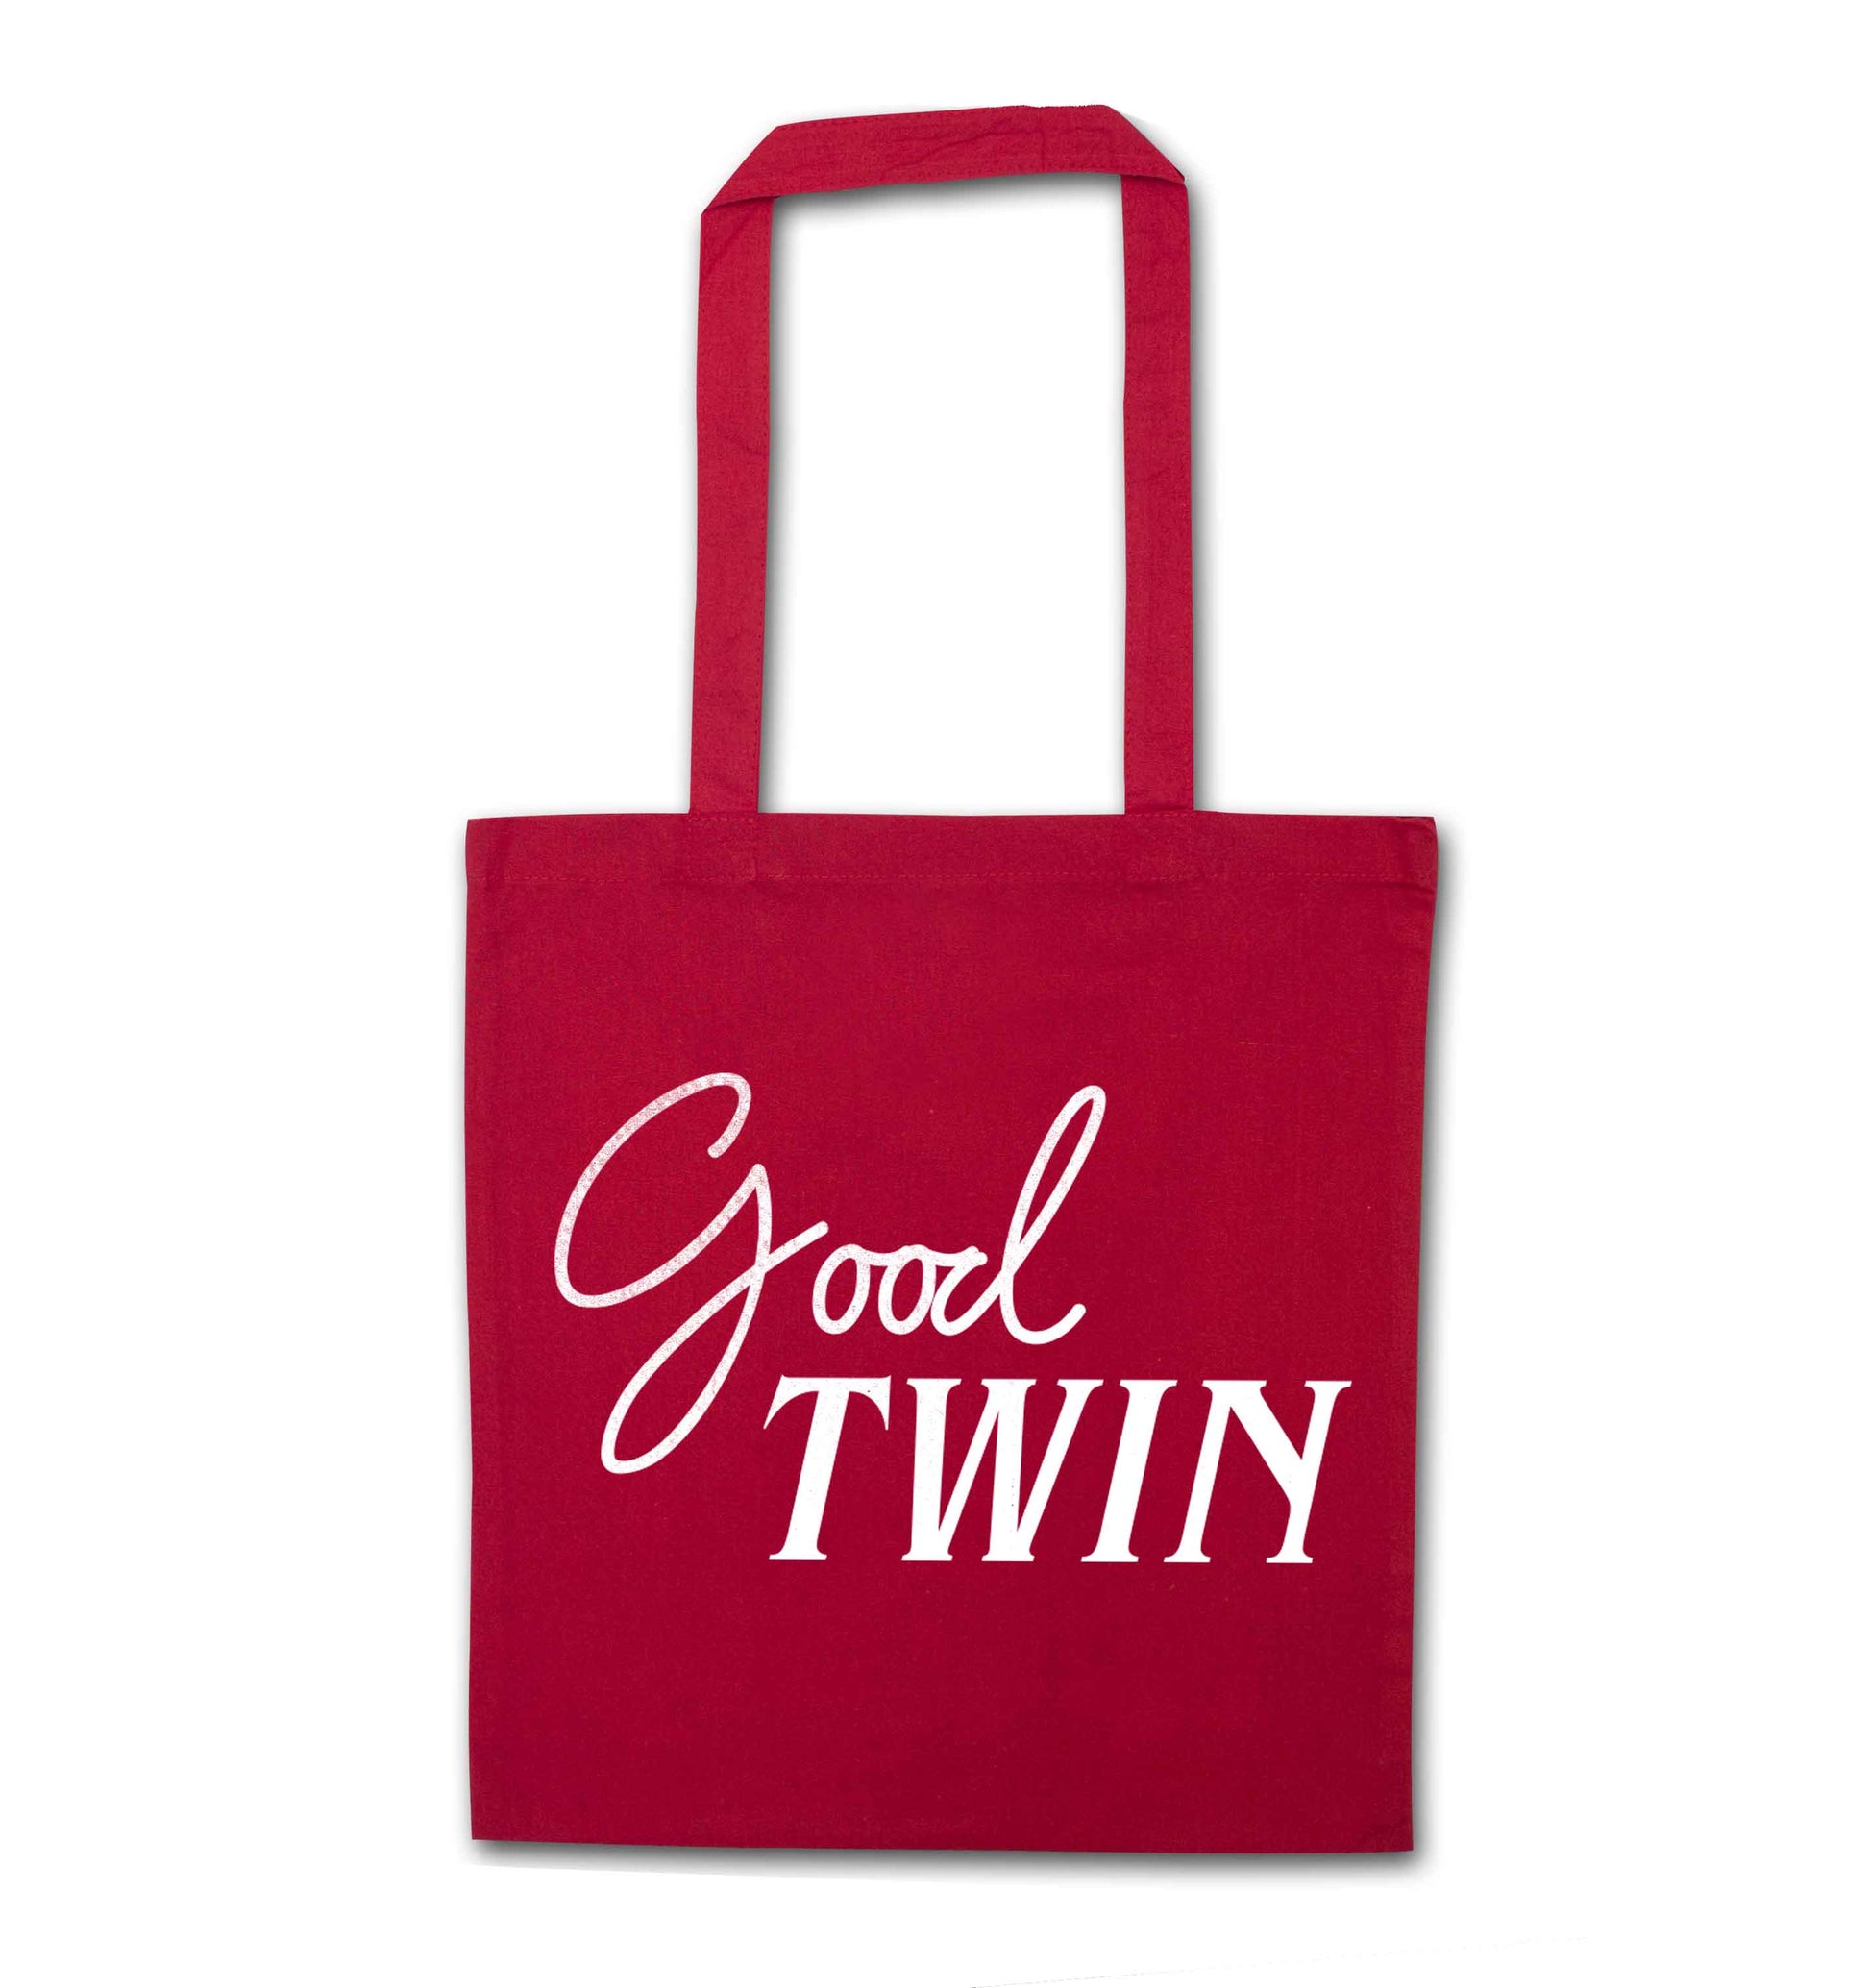 Good twin red tote bag